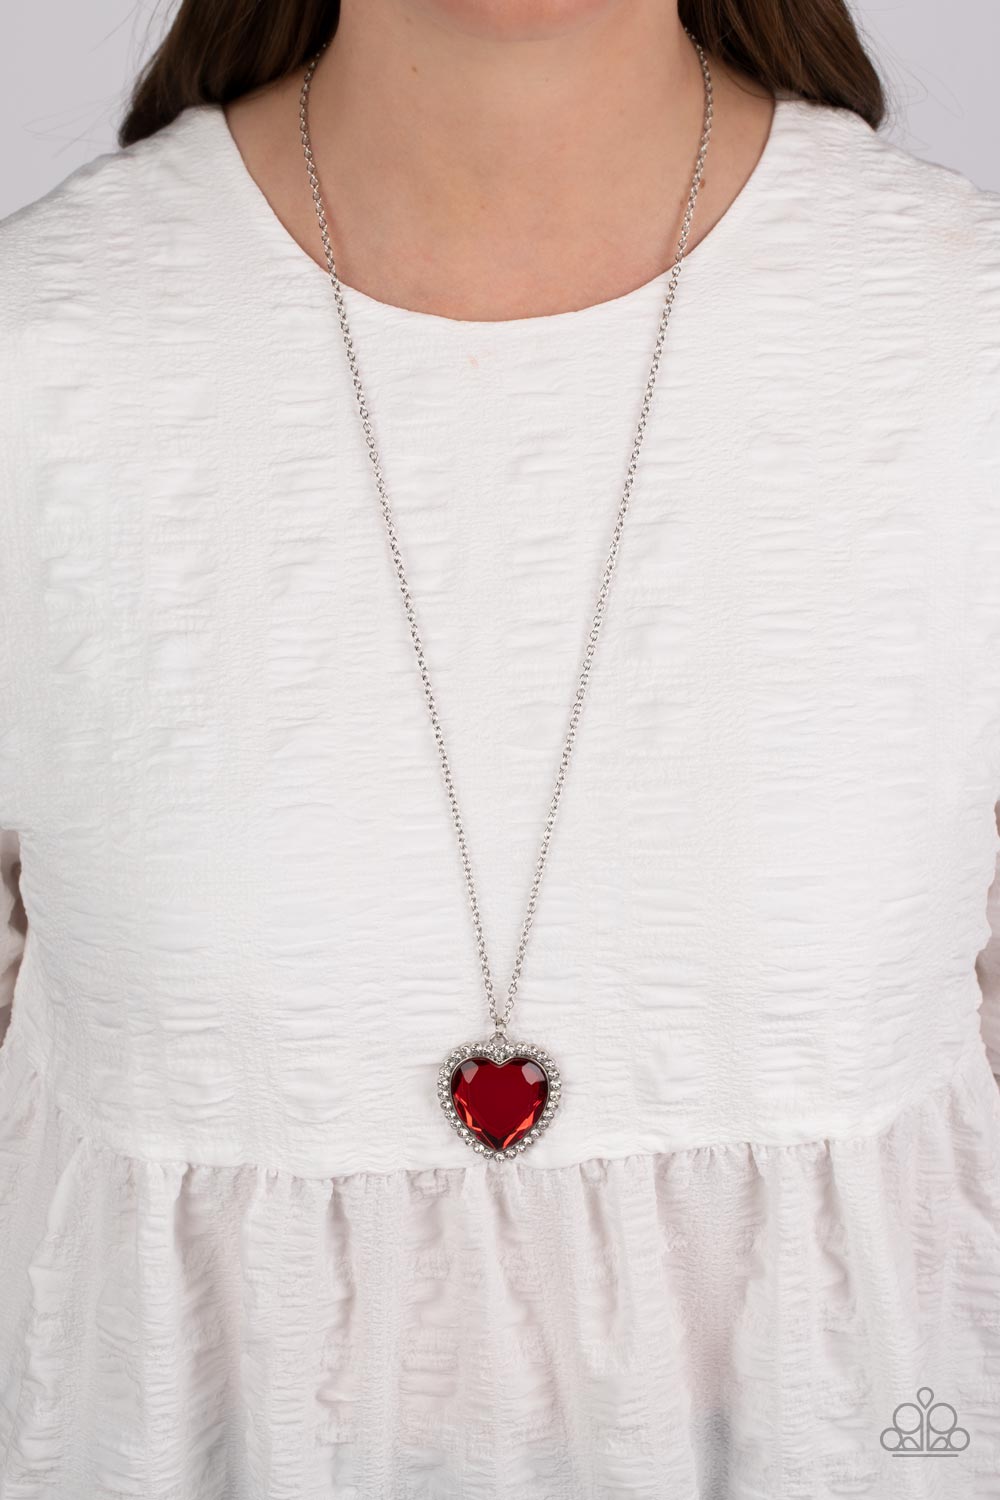 Paparazzi “Prismatically Twitterpated” Red Heart Necklace - Cindysblingboutique